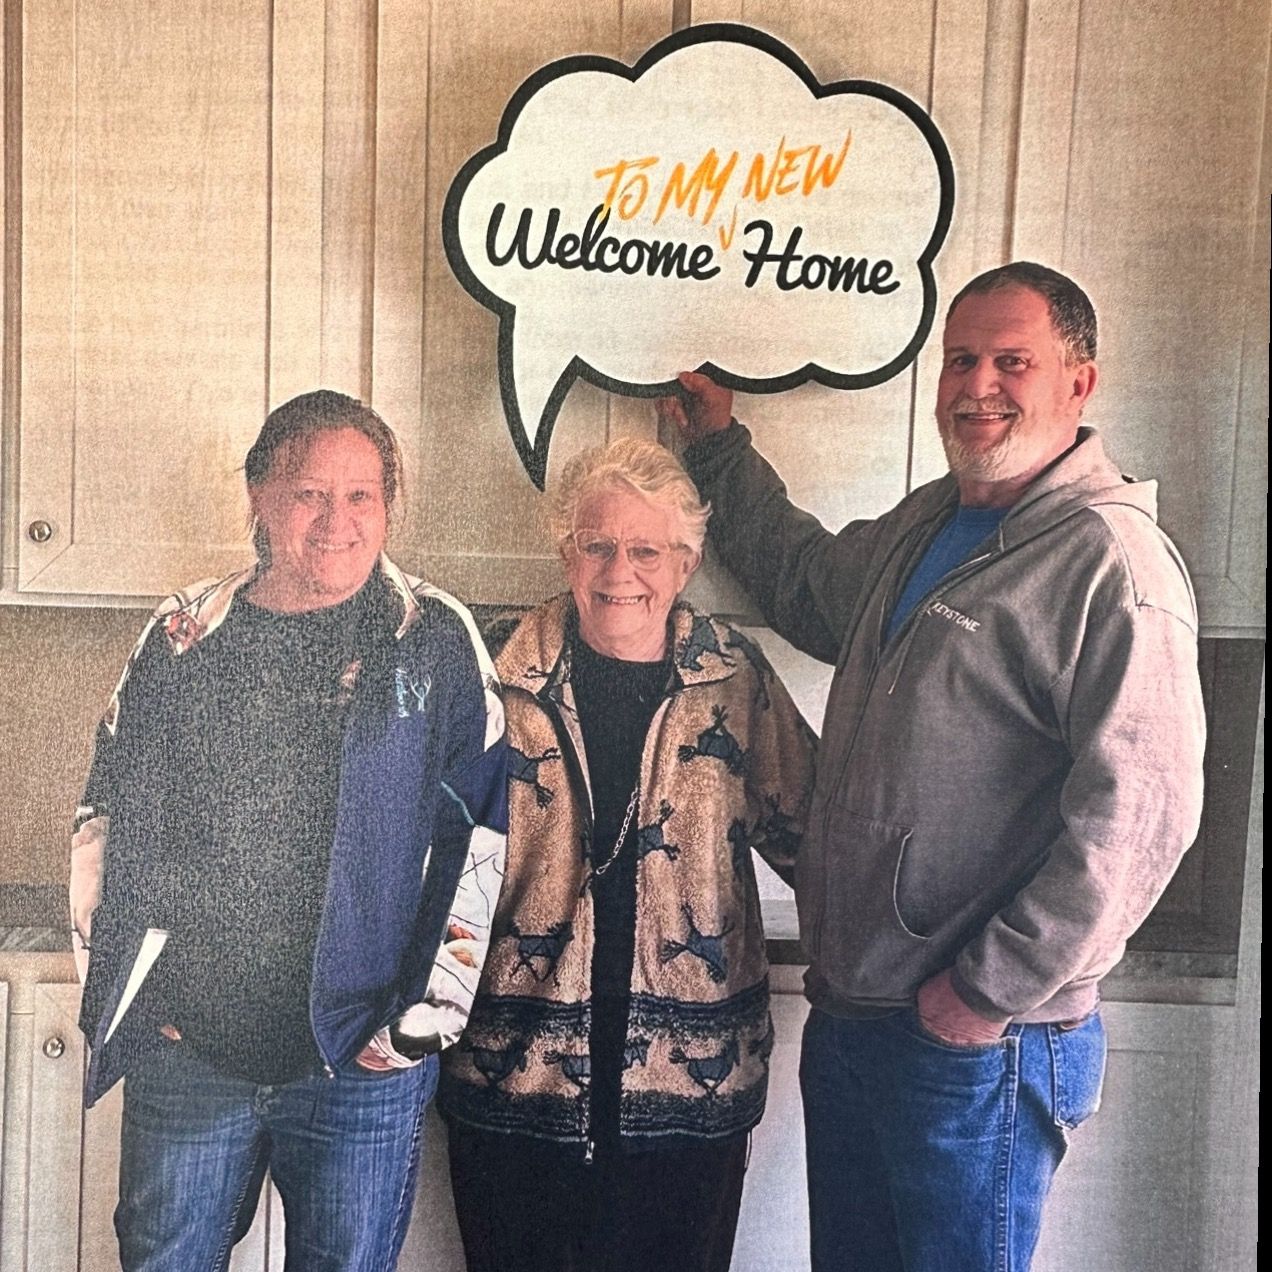 Margaret A. welcome home image